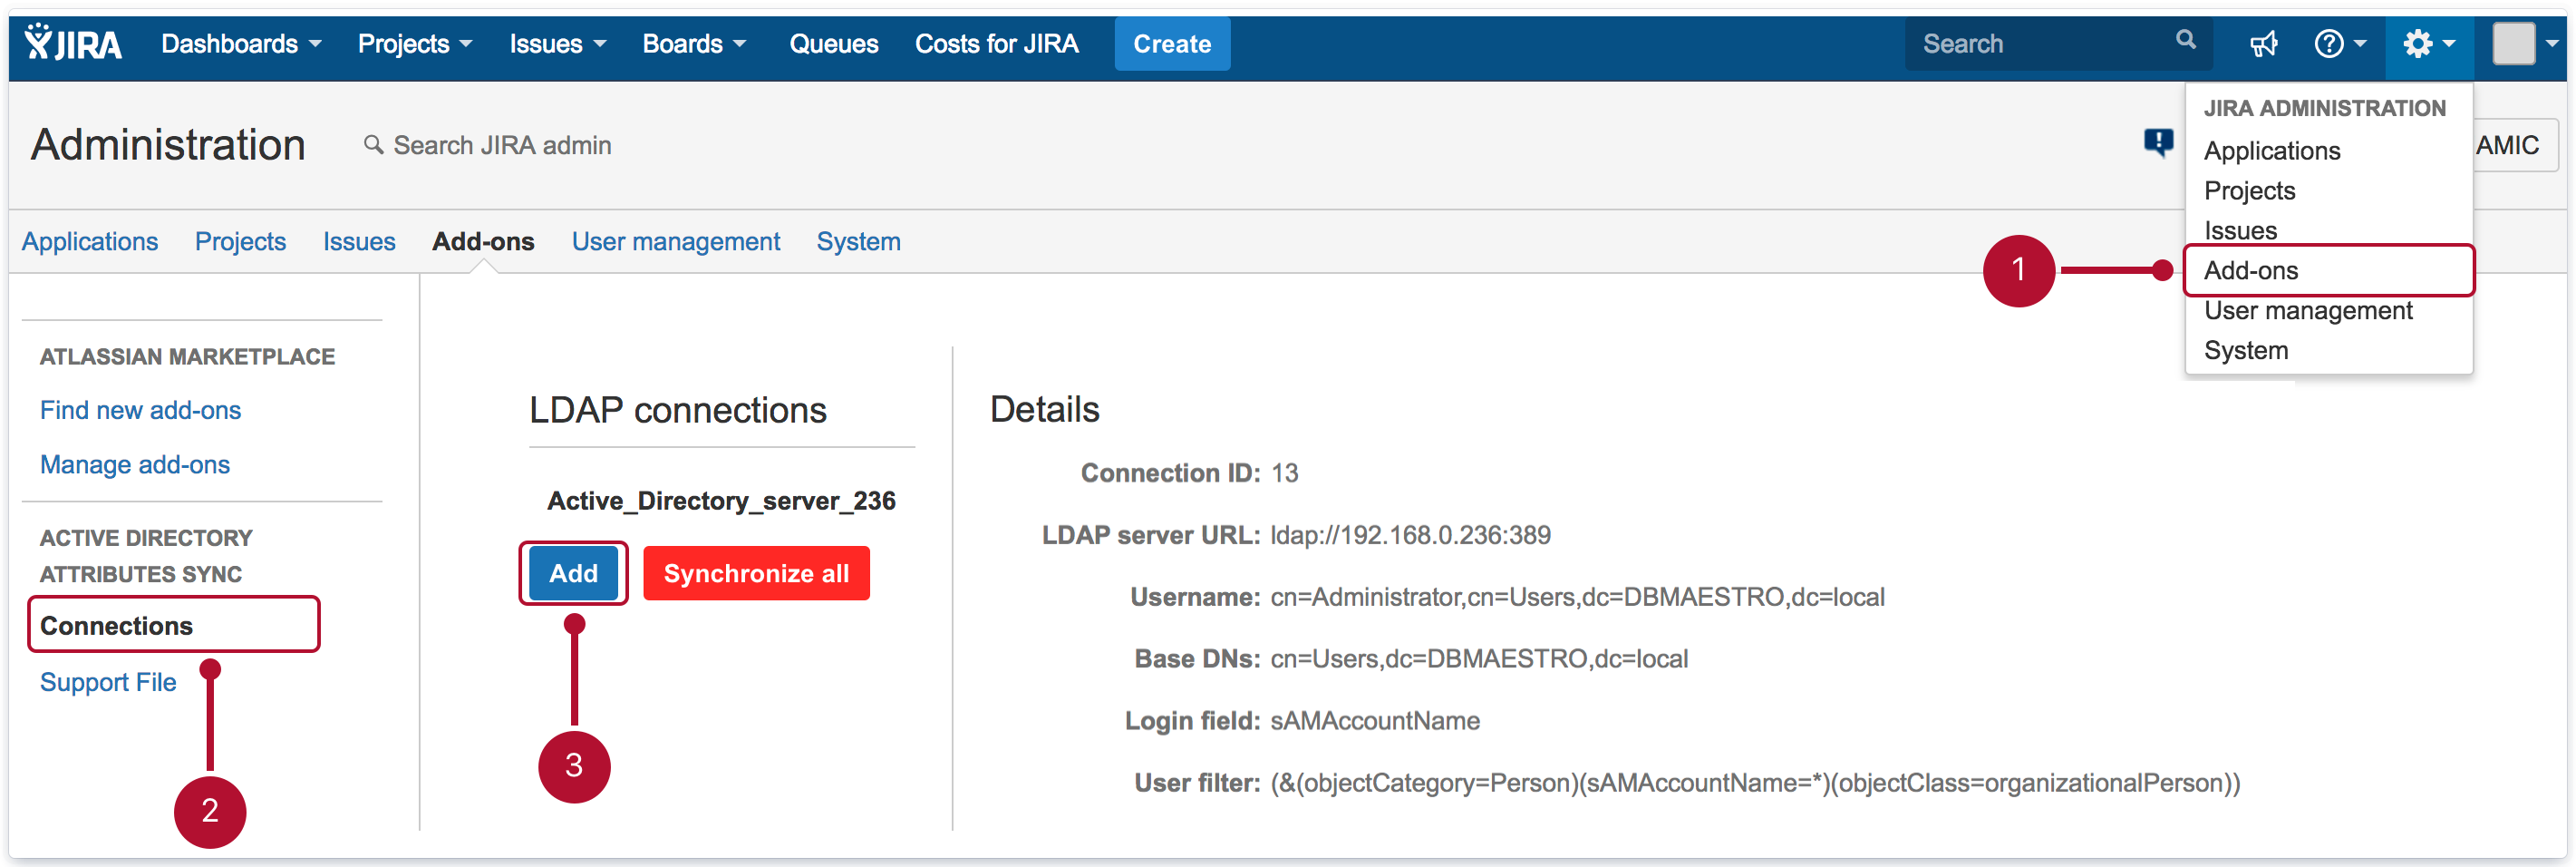 Active Directory Attributes Sync for Jira - Configuring a Jira LDAP connection